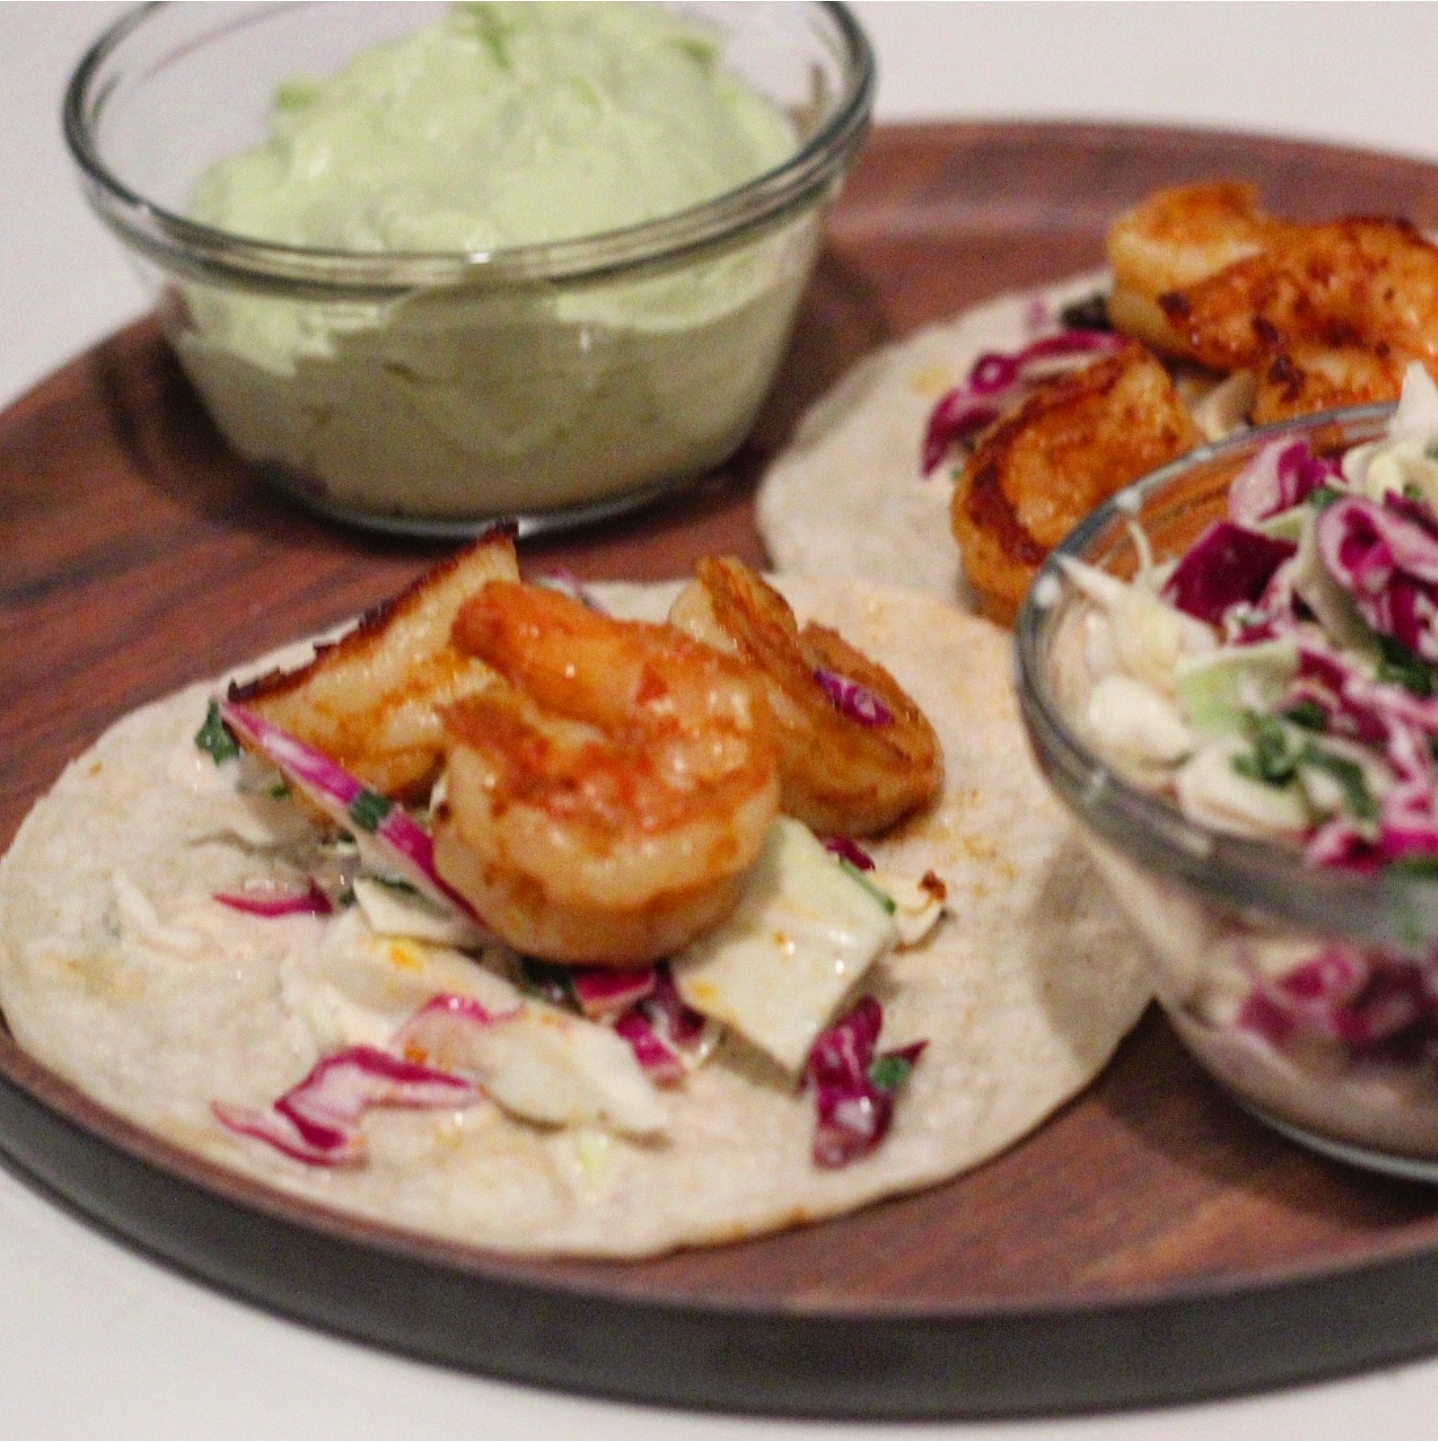 From My Kitchen: Shrimp Tacos